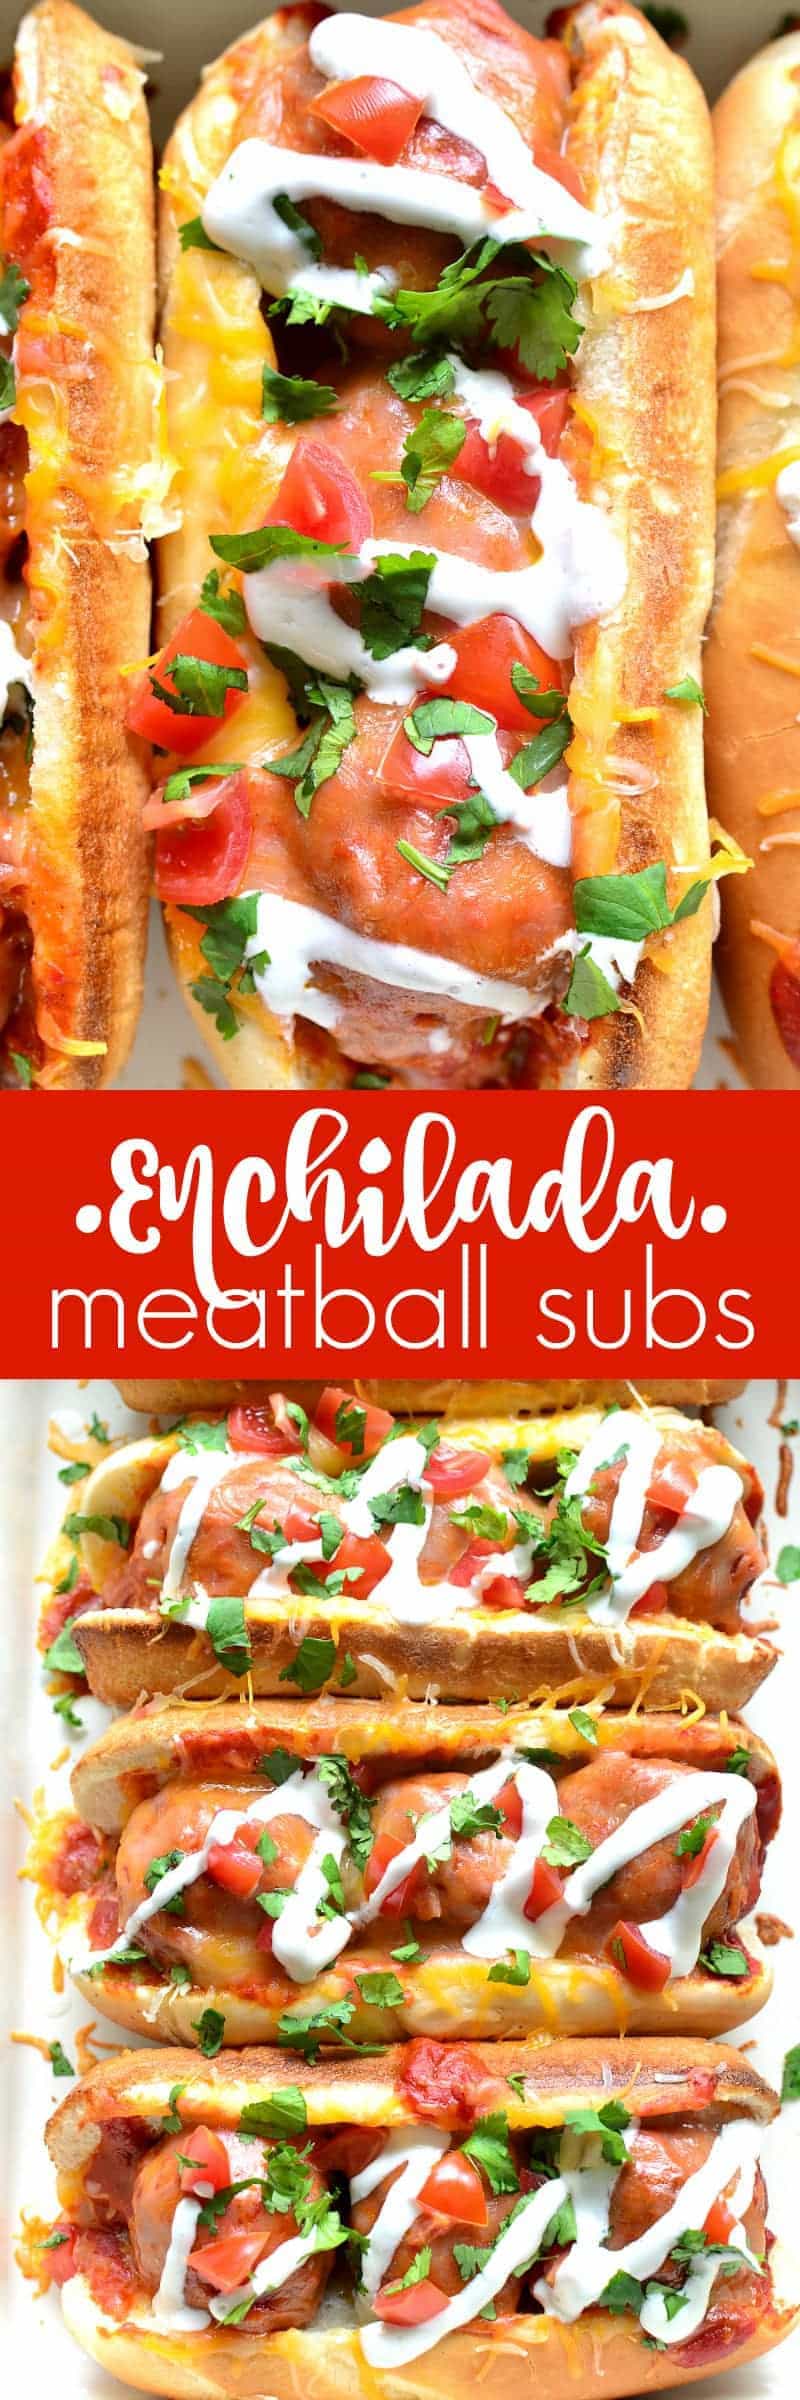 These Enchilada Meatball Subs combine two family favorites in one delicious dish that's easy to make and perfect for busy weeknights!